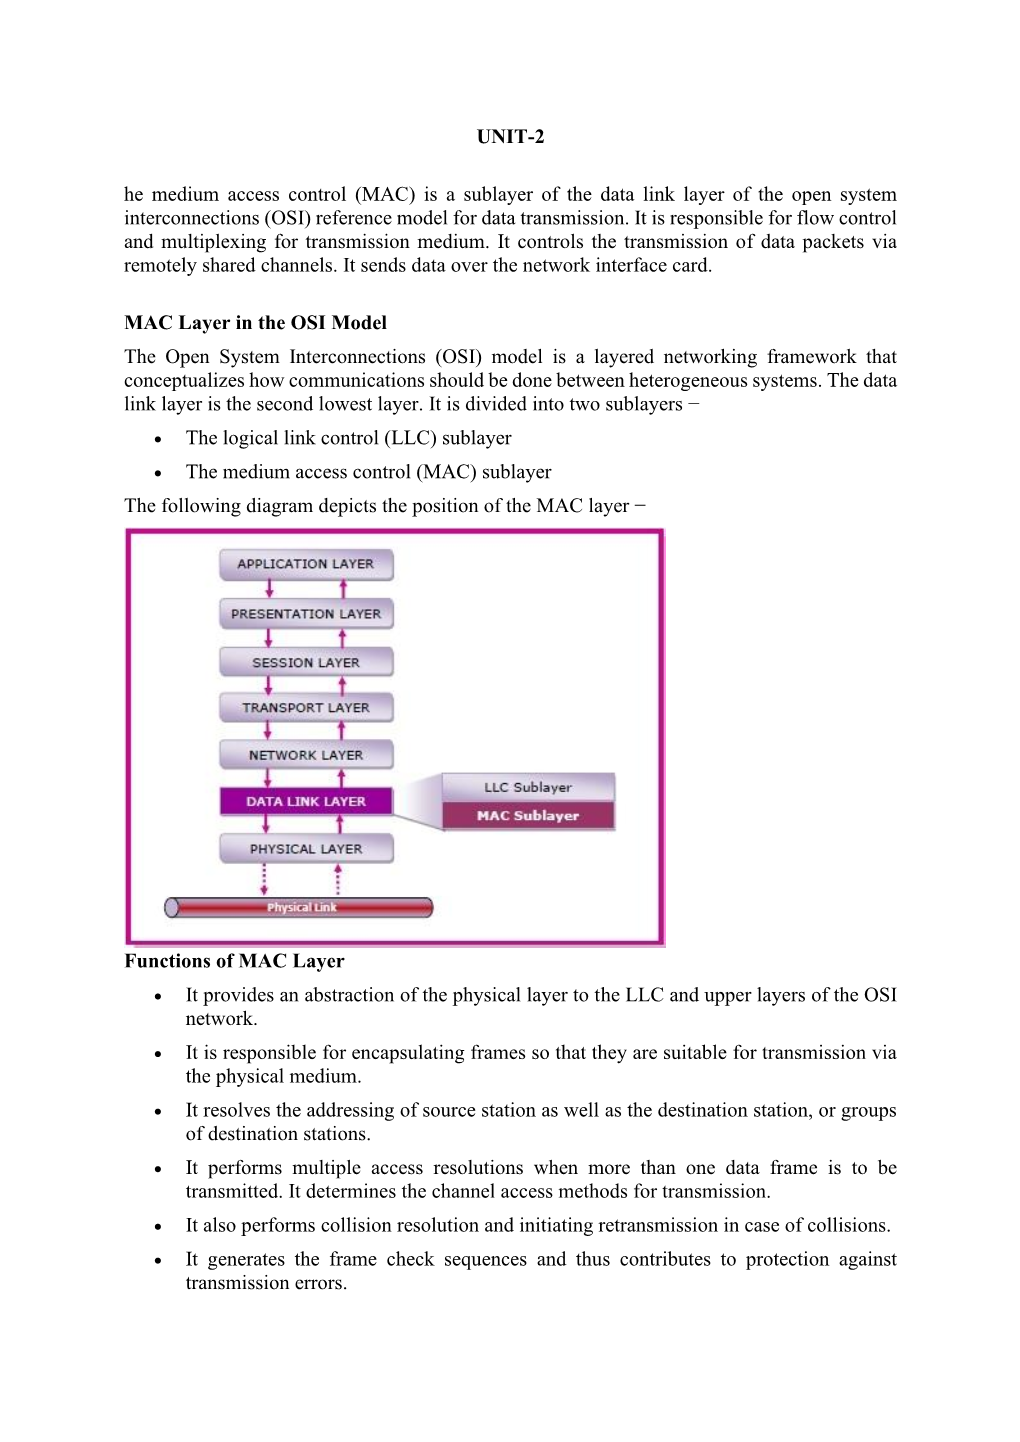 UNIT-2 He Medium Access Control (MAC) Is a Sublayer of the Data Link Layer of the Open System Interconnections (OSI) Reference Model for Data Transmission